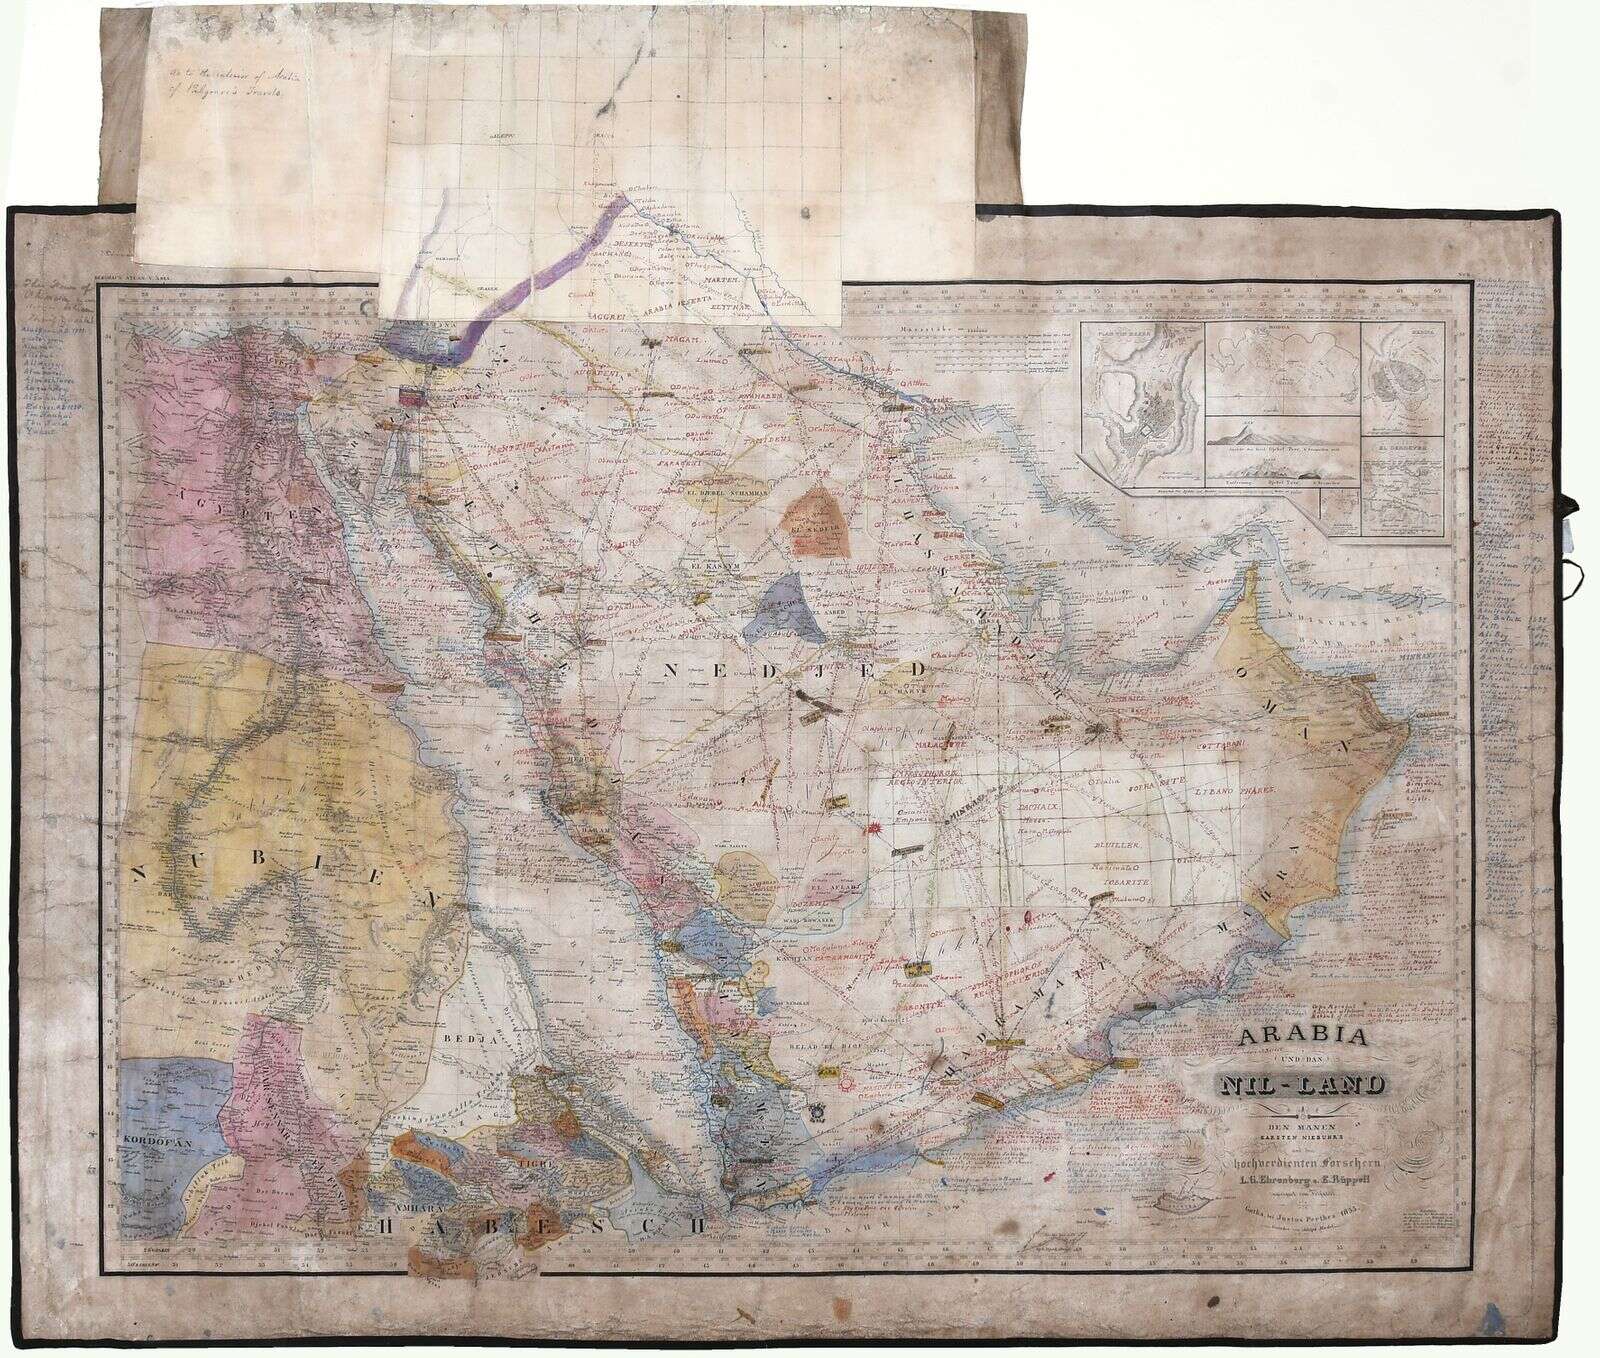 uae: rare dh430,000 map of abu dhabi to be sold at upcoming book fair